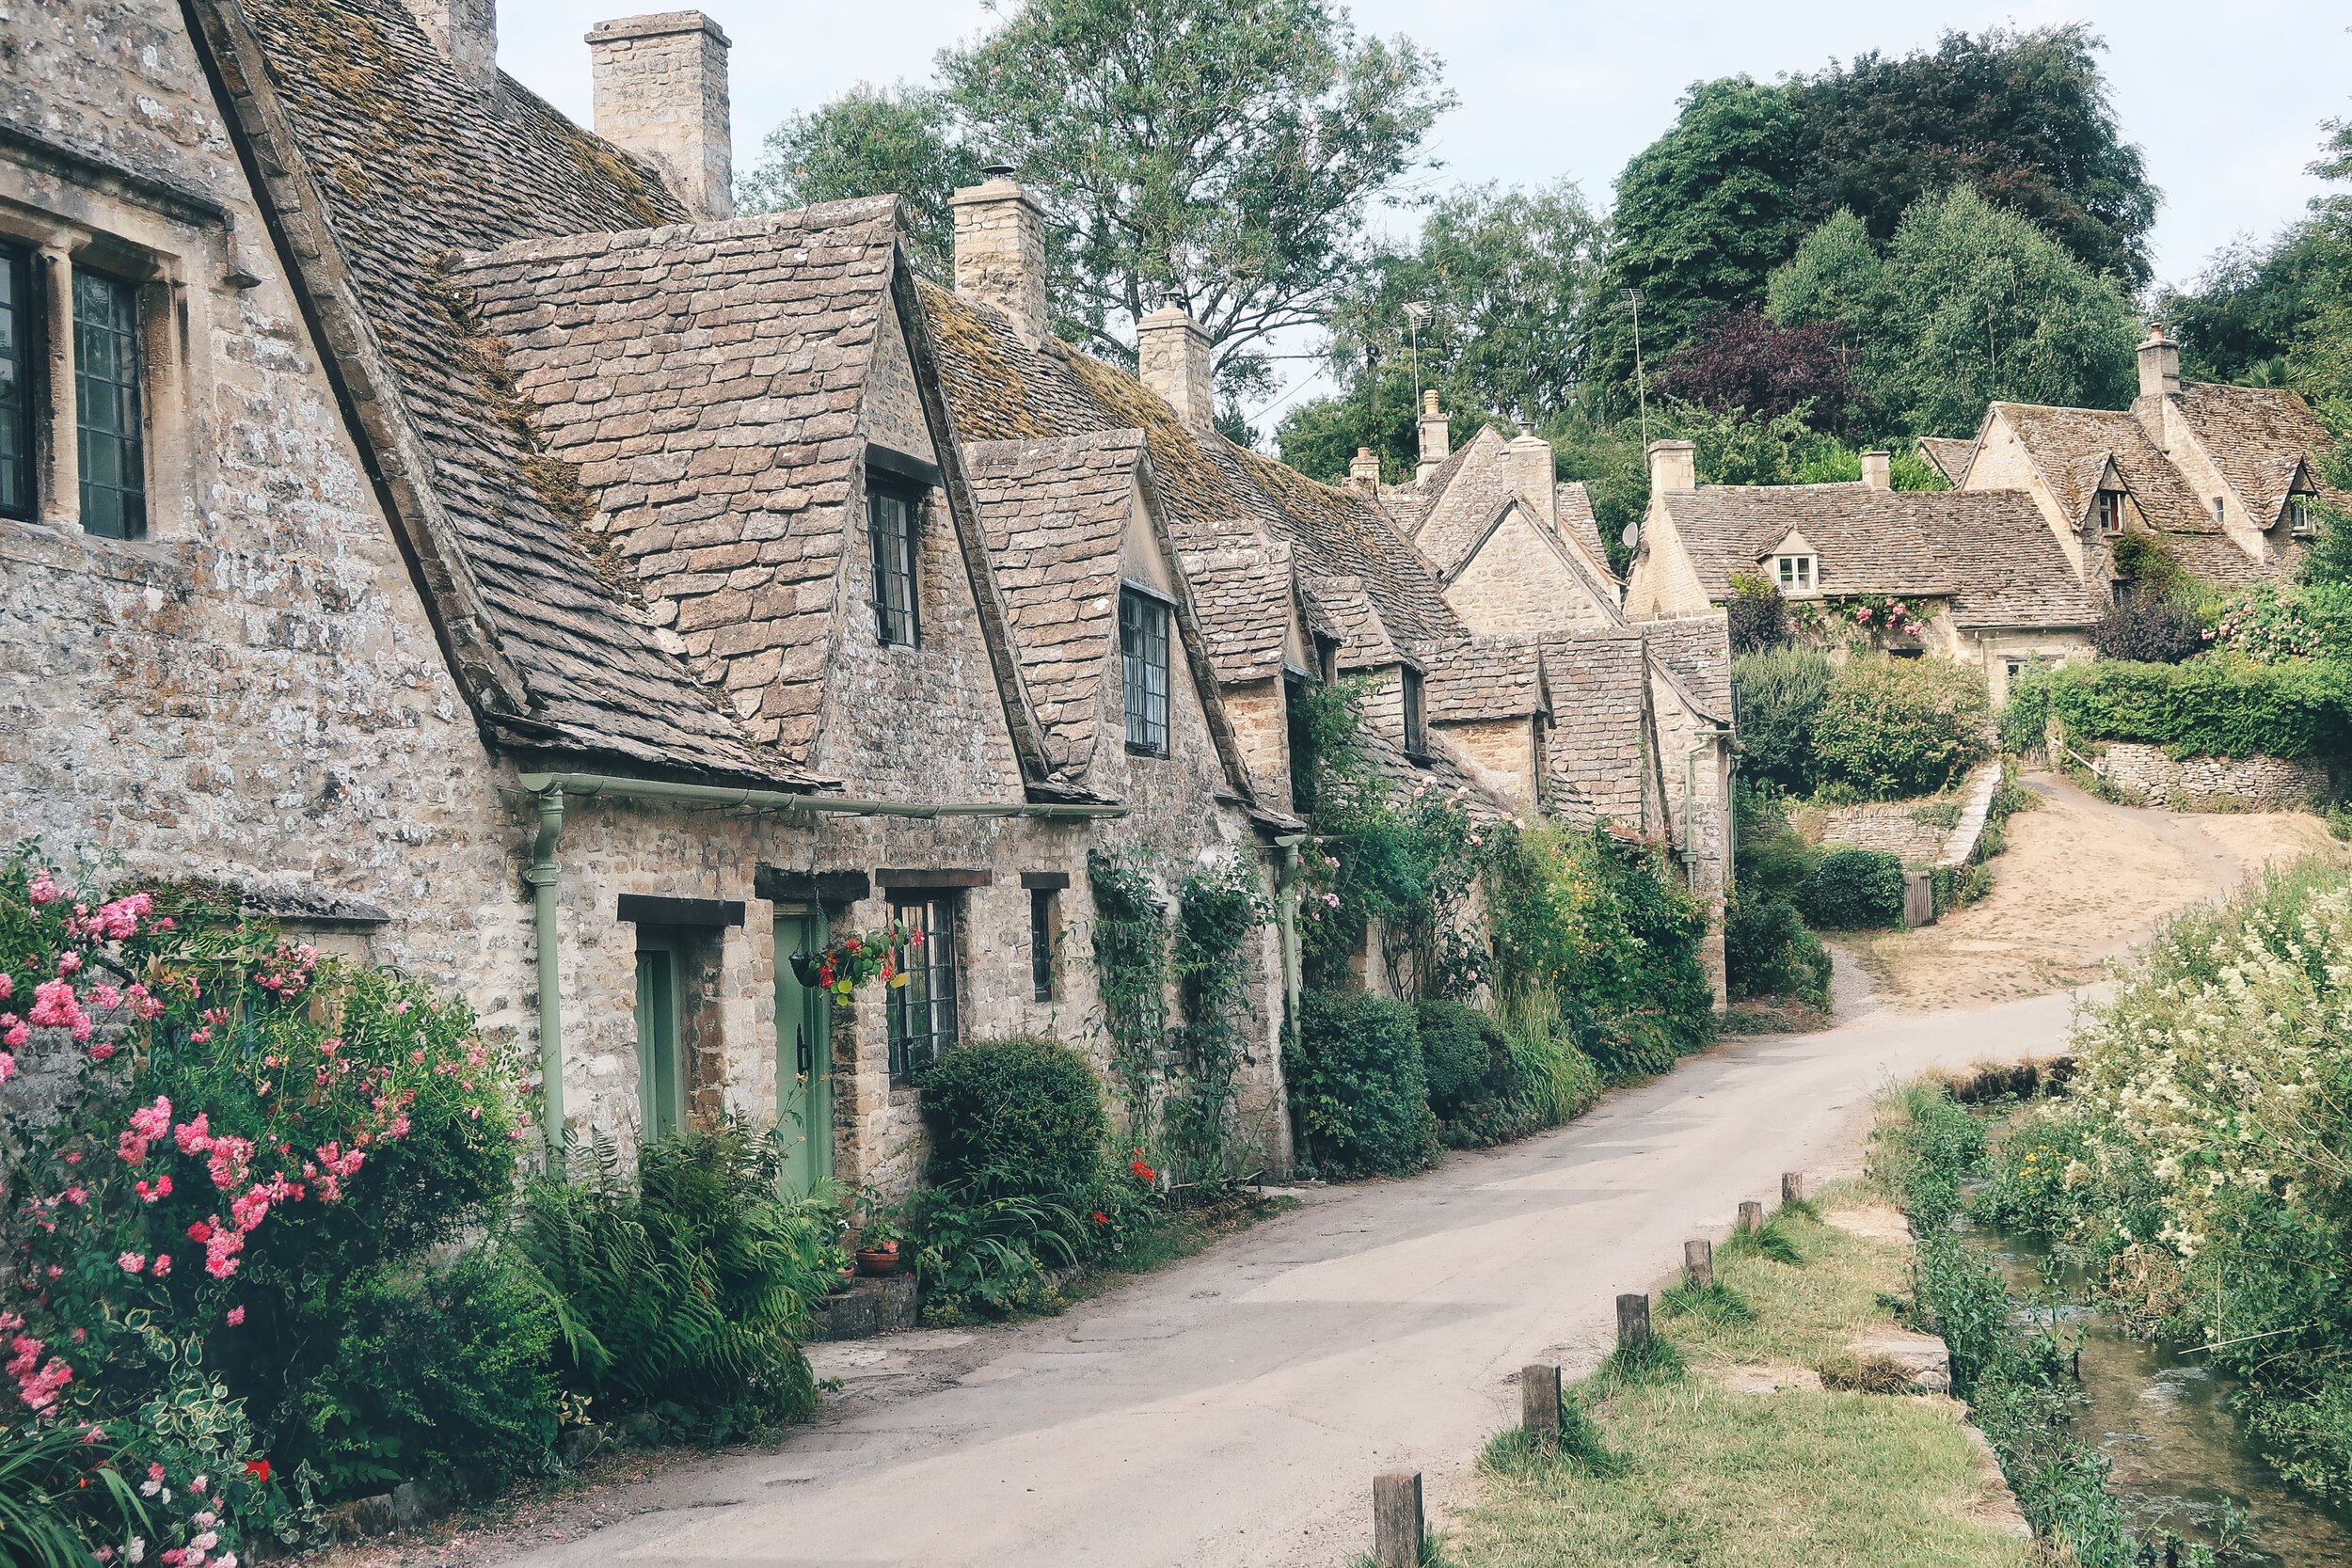 The famous Arlington Row in Bibury, Cotswolds. Stone houses line a small street with slate roofs and quaint architecture